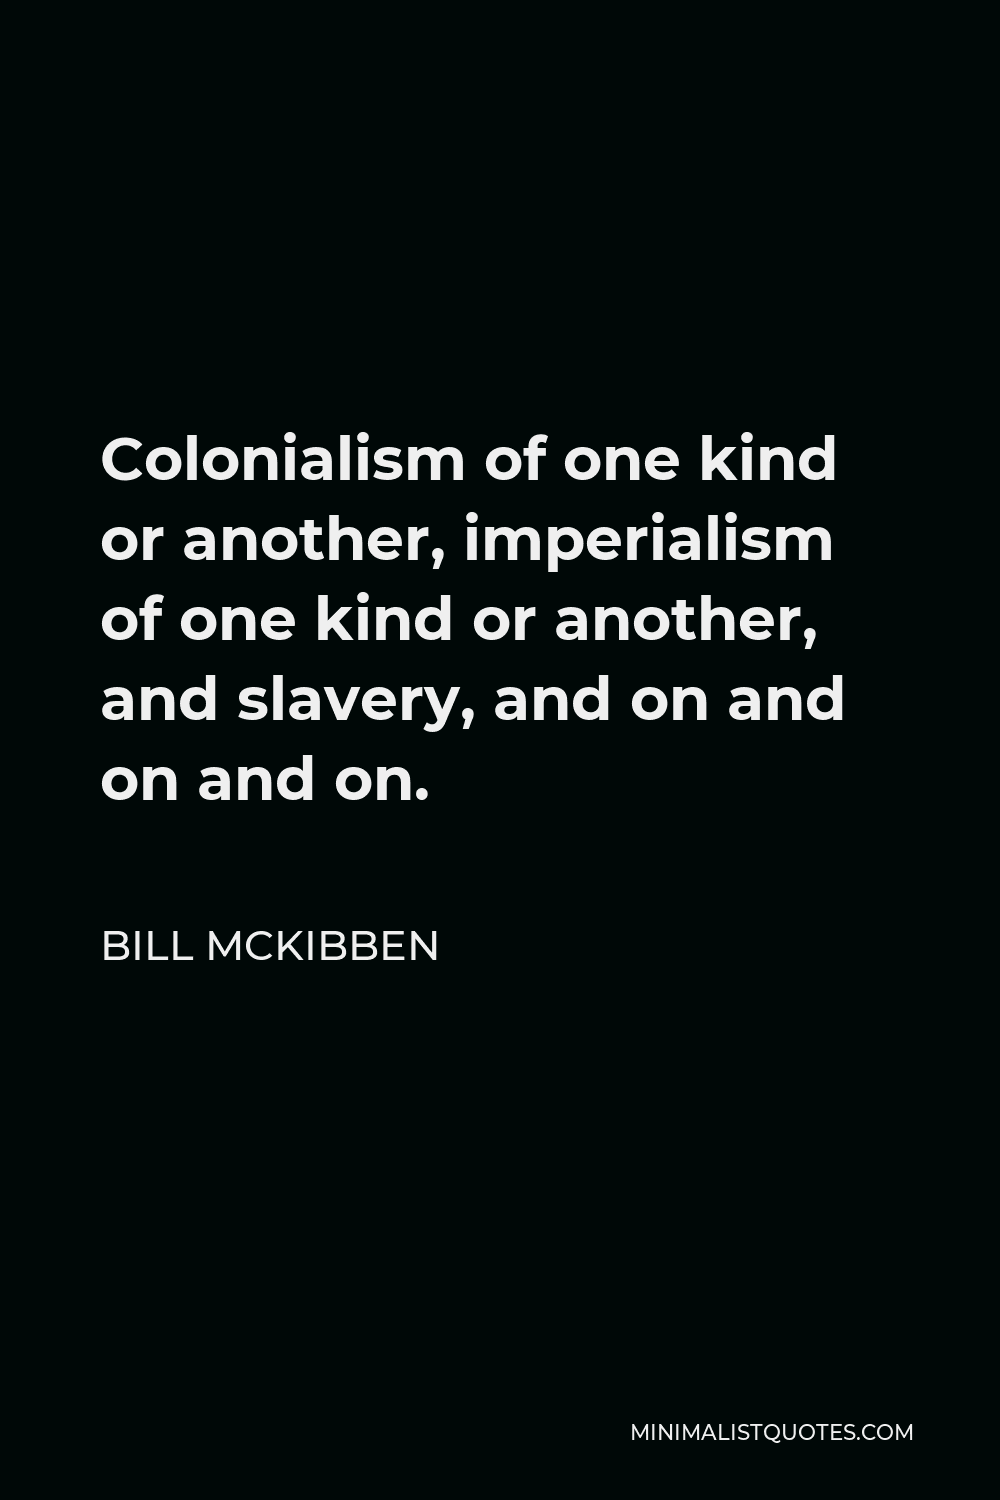 Bill McKibben Quote - Colonialism of one kind or another, imperialism of one kind or another, and slavery, and on and on and on.